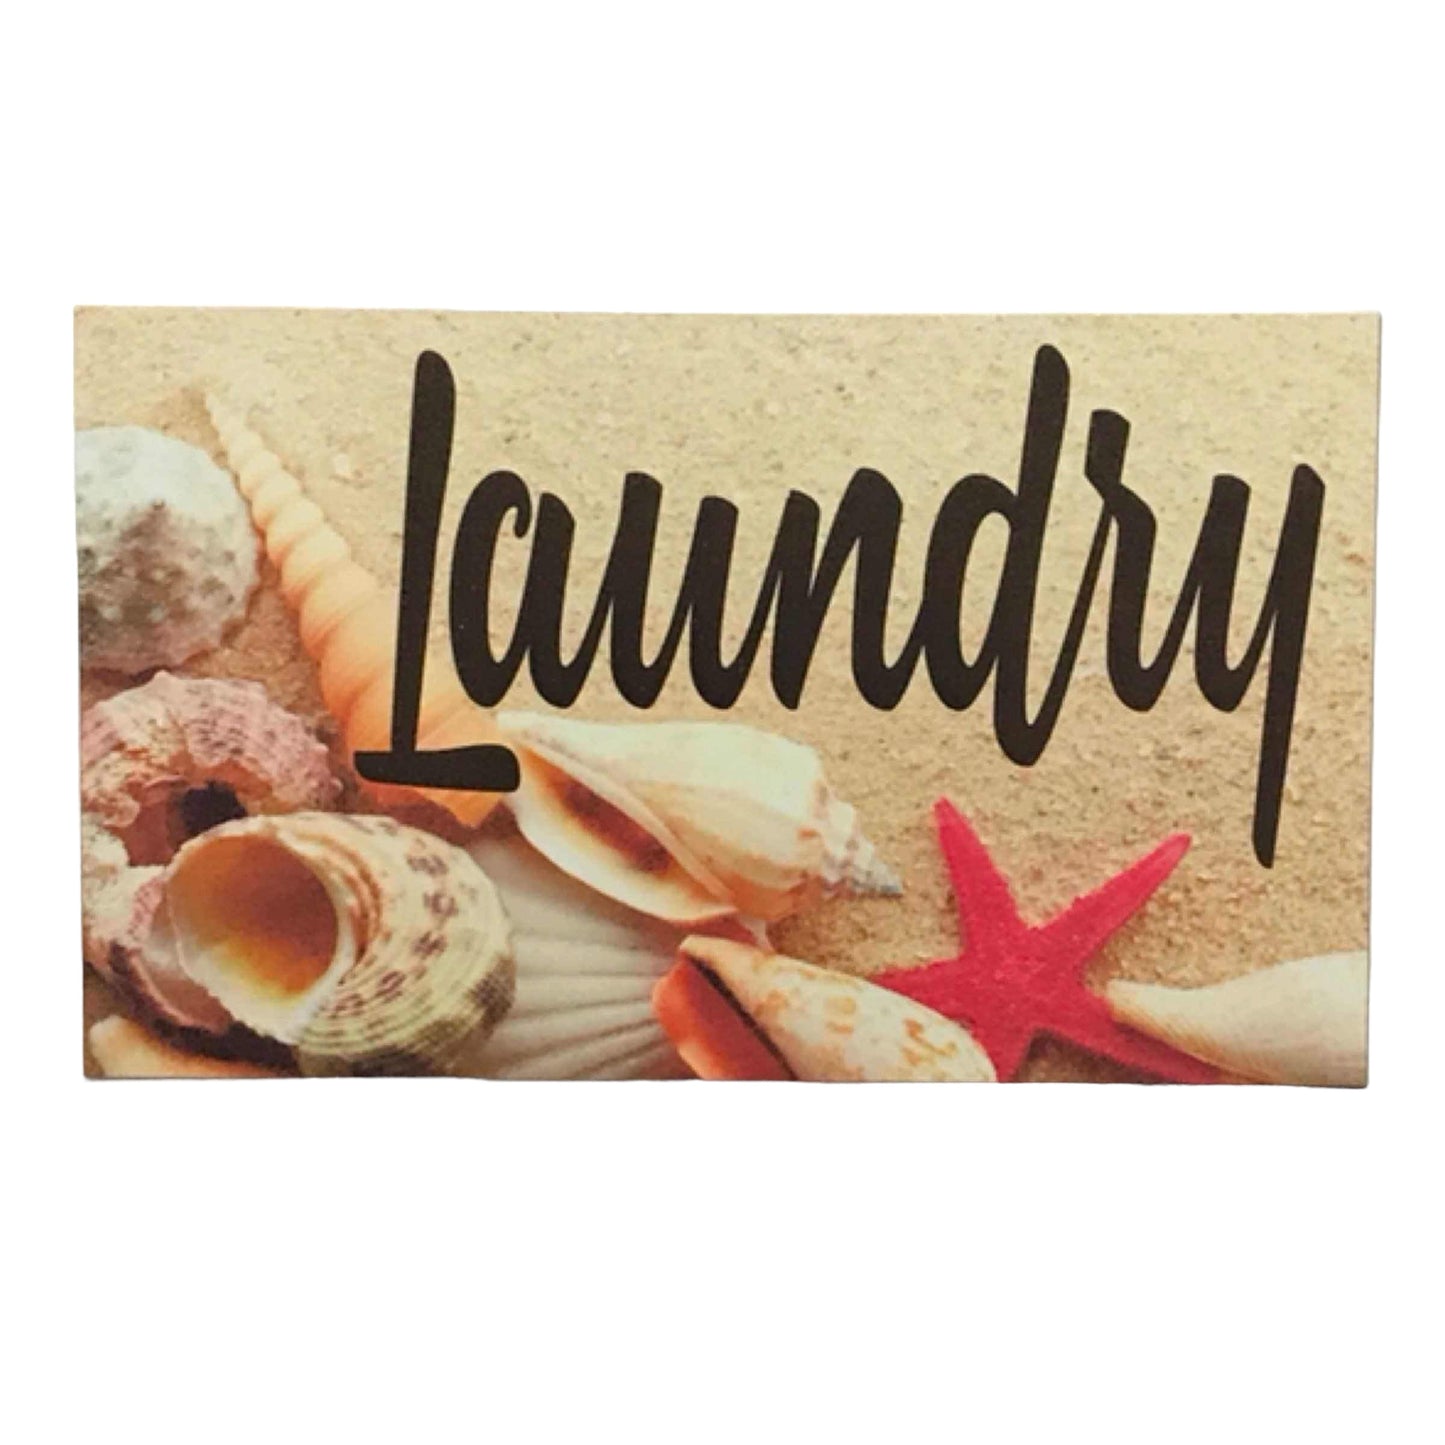 Beach Shells Starfish Toilet Laundry Bathroom Sign - The Renmy Store Homewares & Gifts 